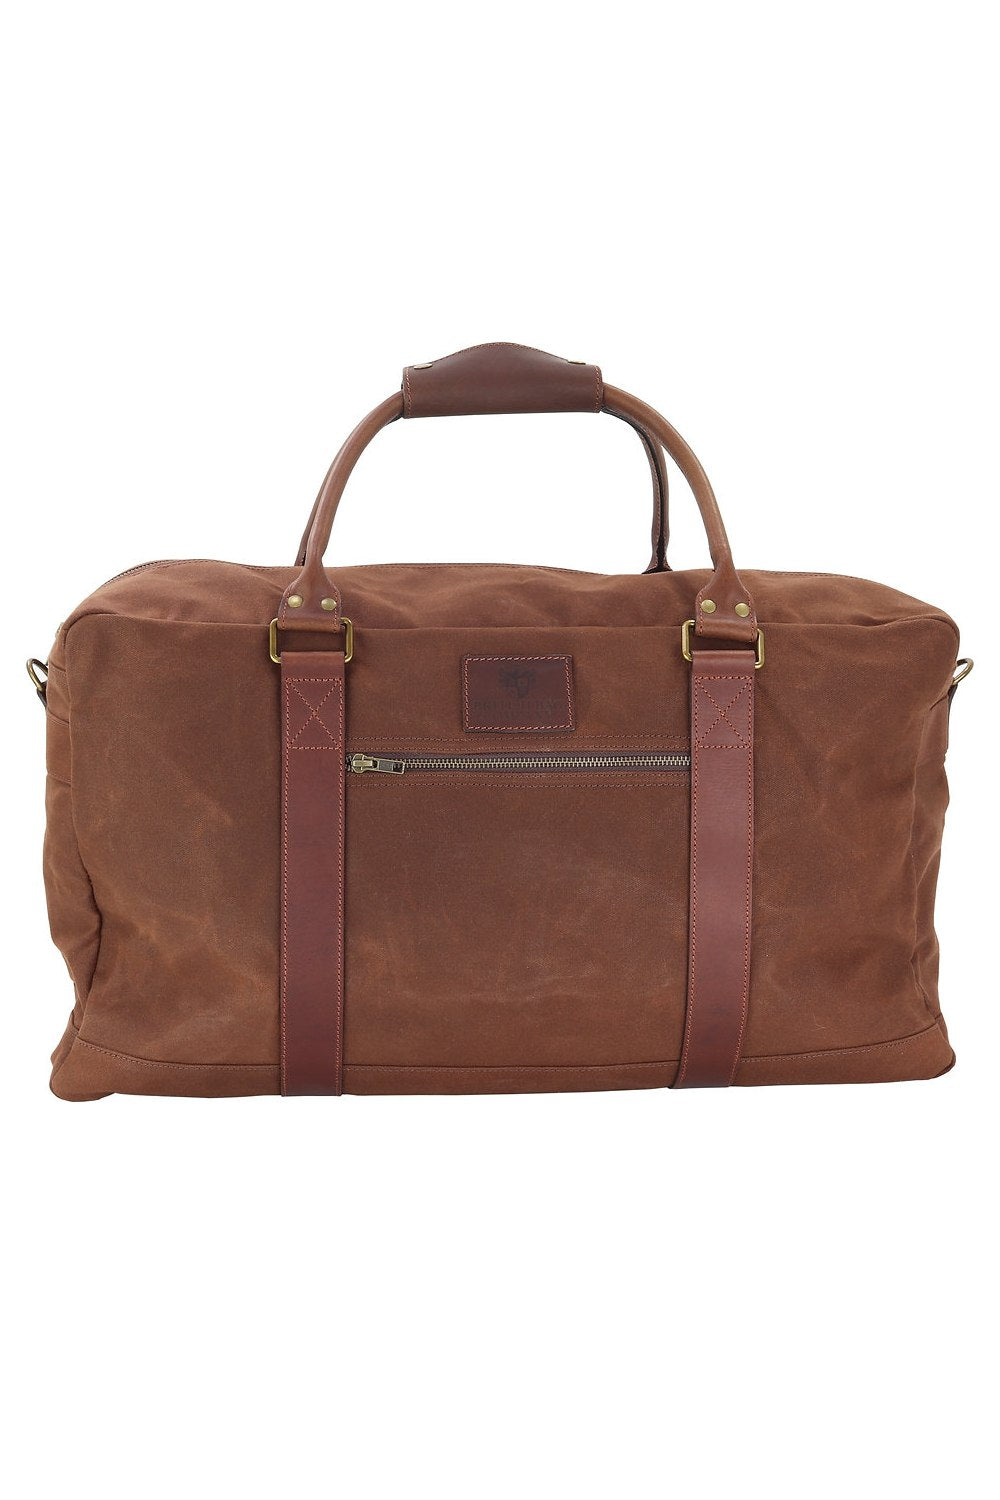 The British Bag Co. Waxed Canvas Holdall in Brown